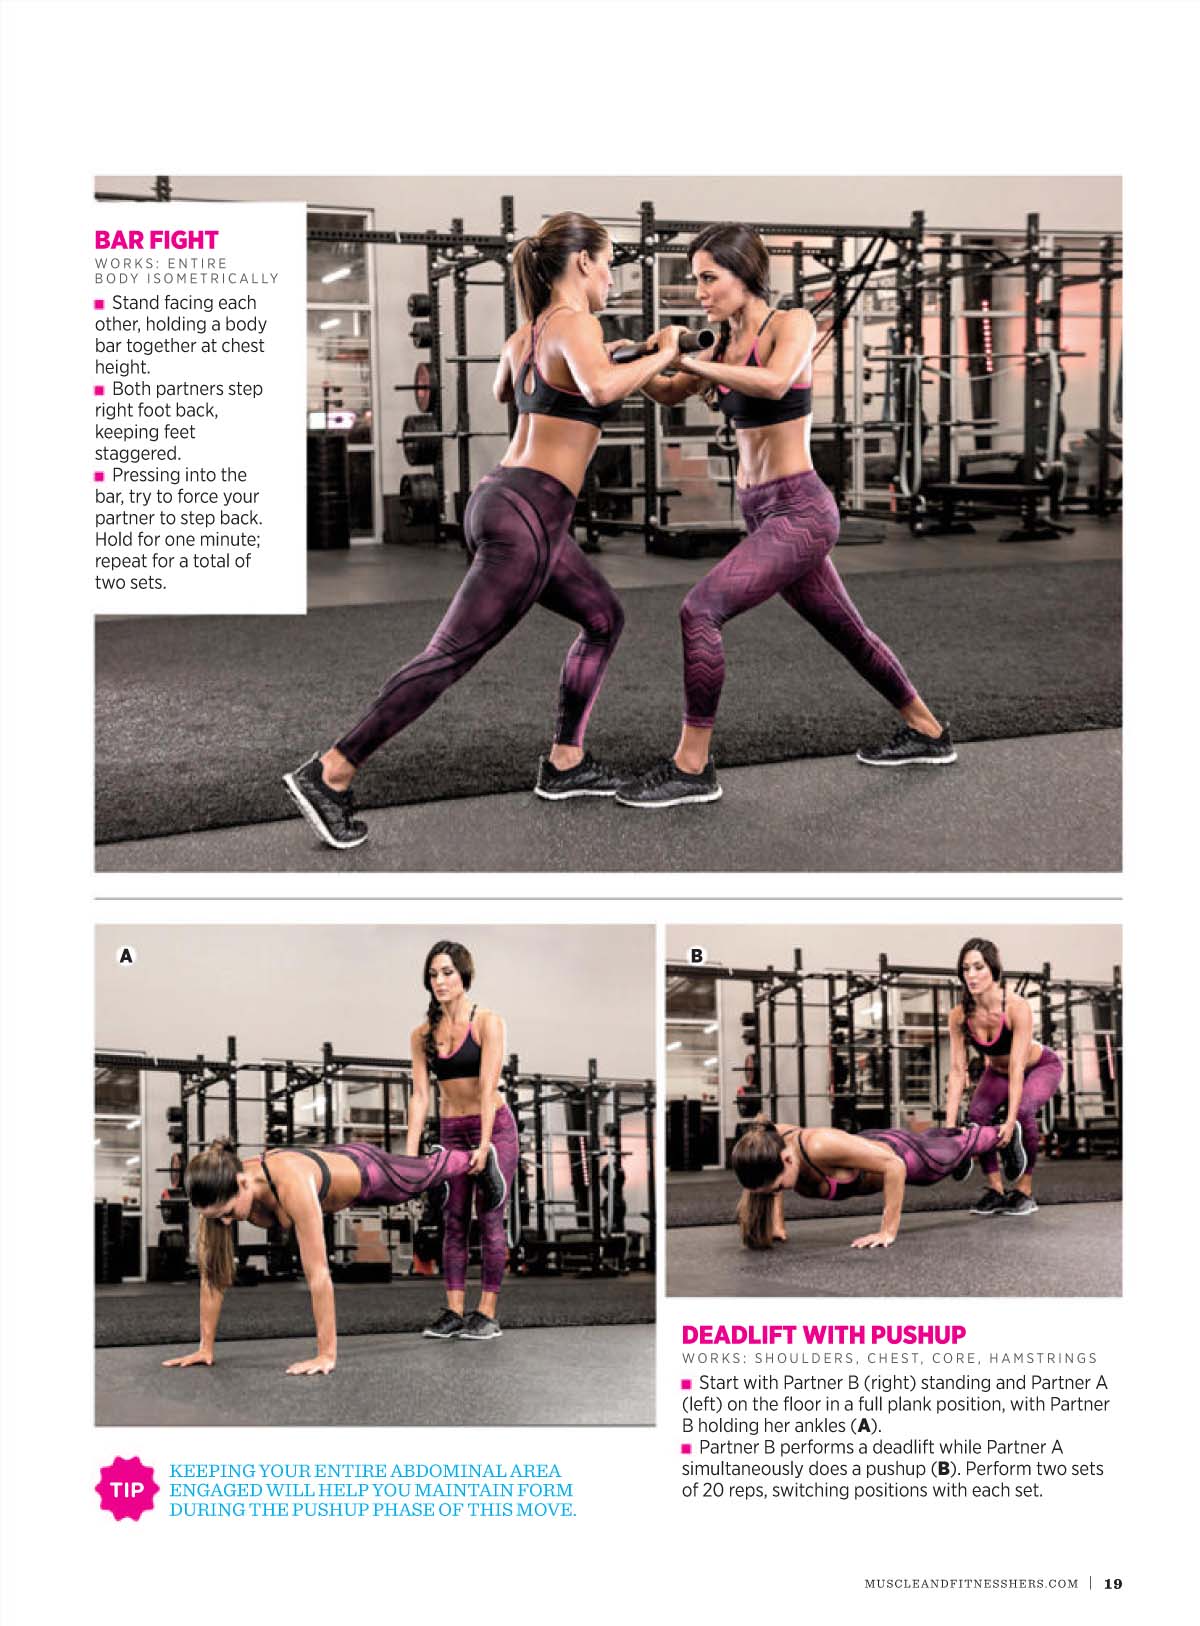 Bella Twins 9-page spread on Muscle & Fitness Hers magazine – Wrestling-Online.com1200 x 1626